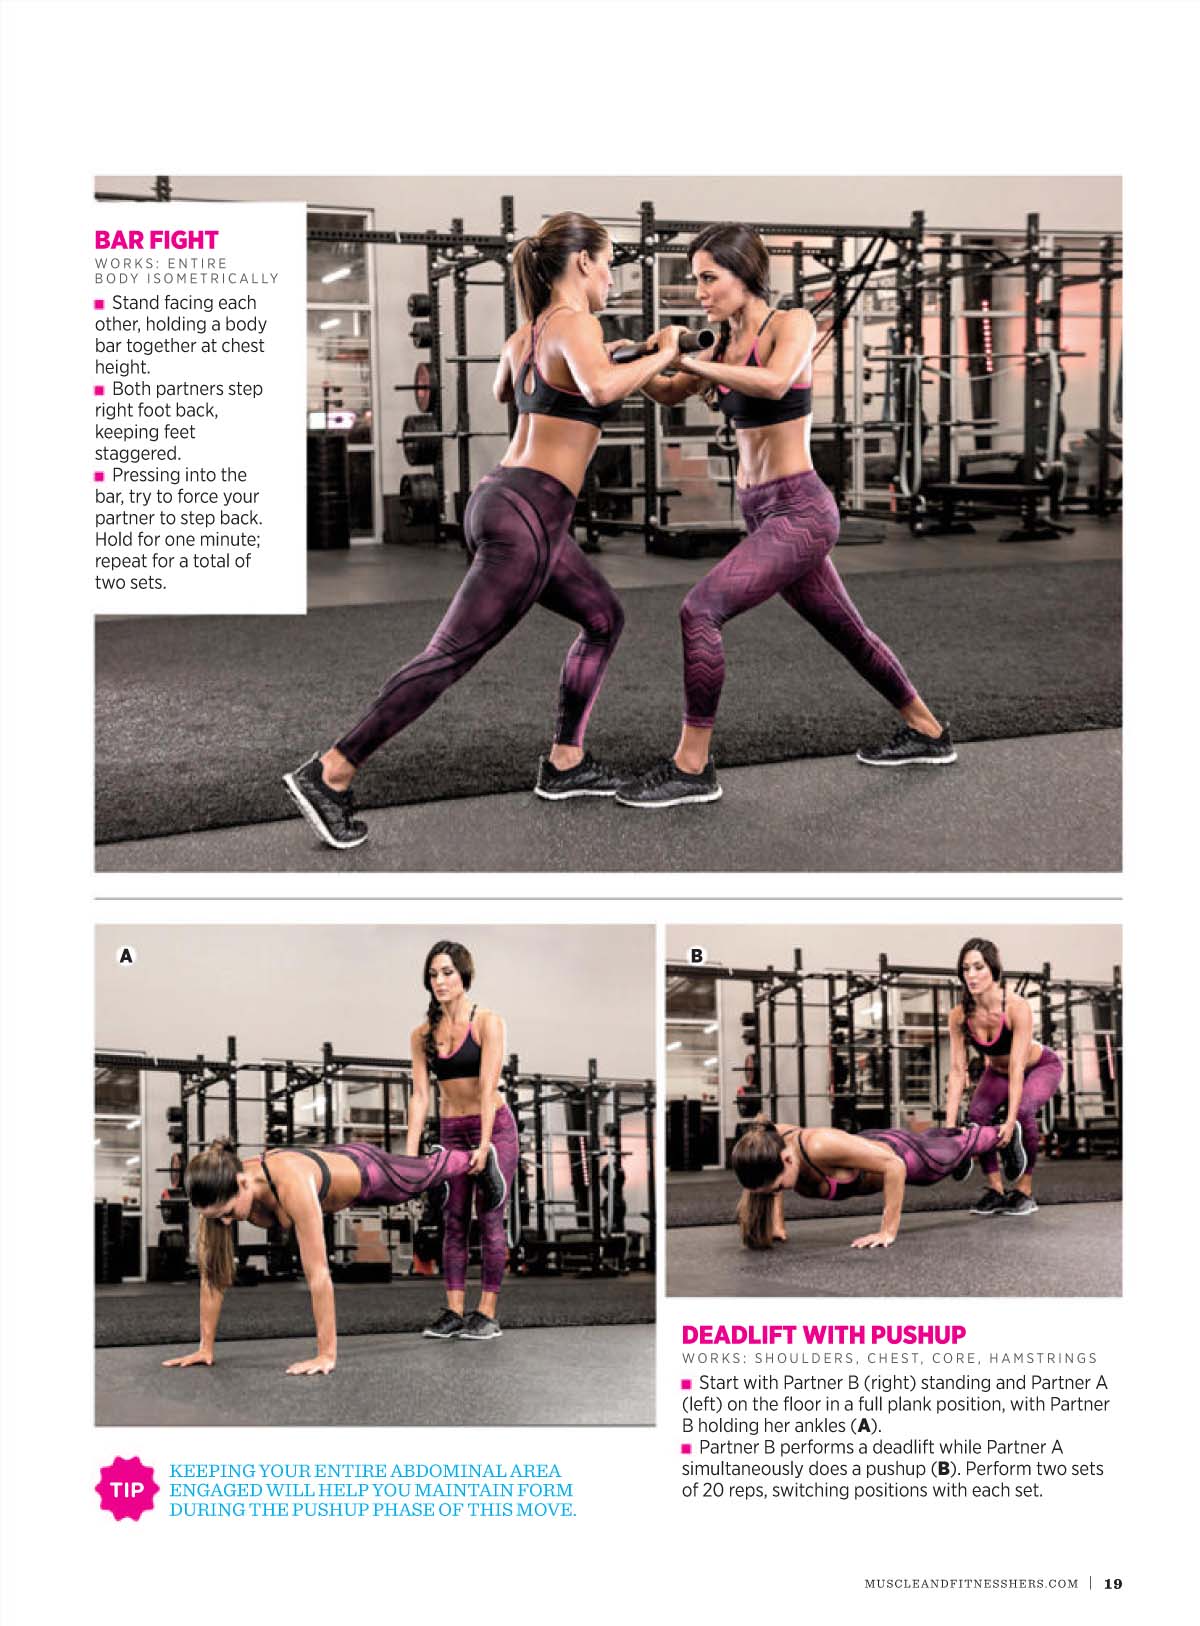 Bella Twins 9-page spread on Muscle & Fitness Hers magazine – Wrestling-Online.com1200 x 1626